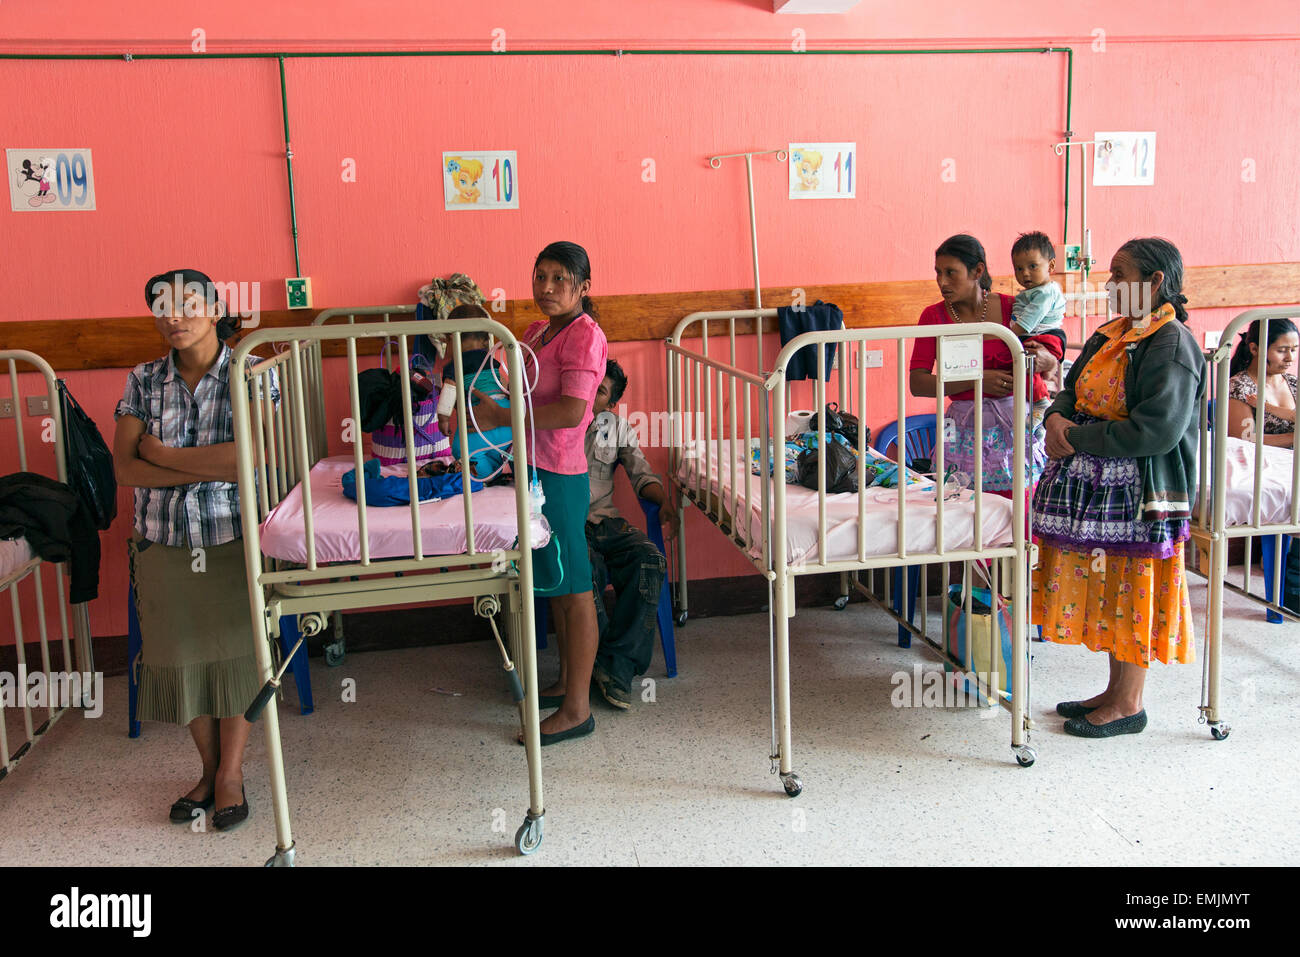 Guatemala,Jalapa, children's ward in the local hospital showing over crowding and minimal health facilities. Stock Photo